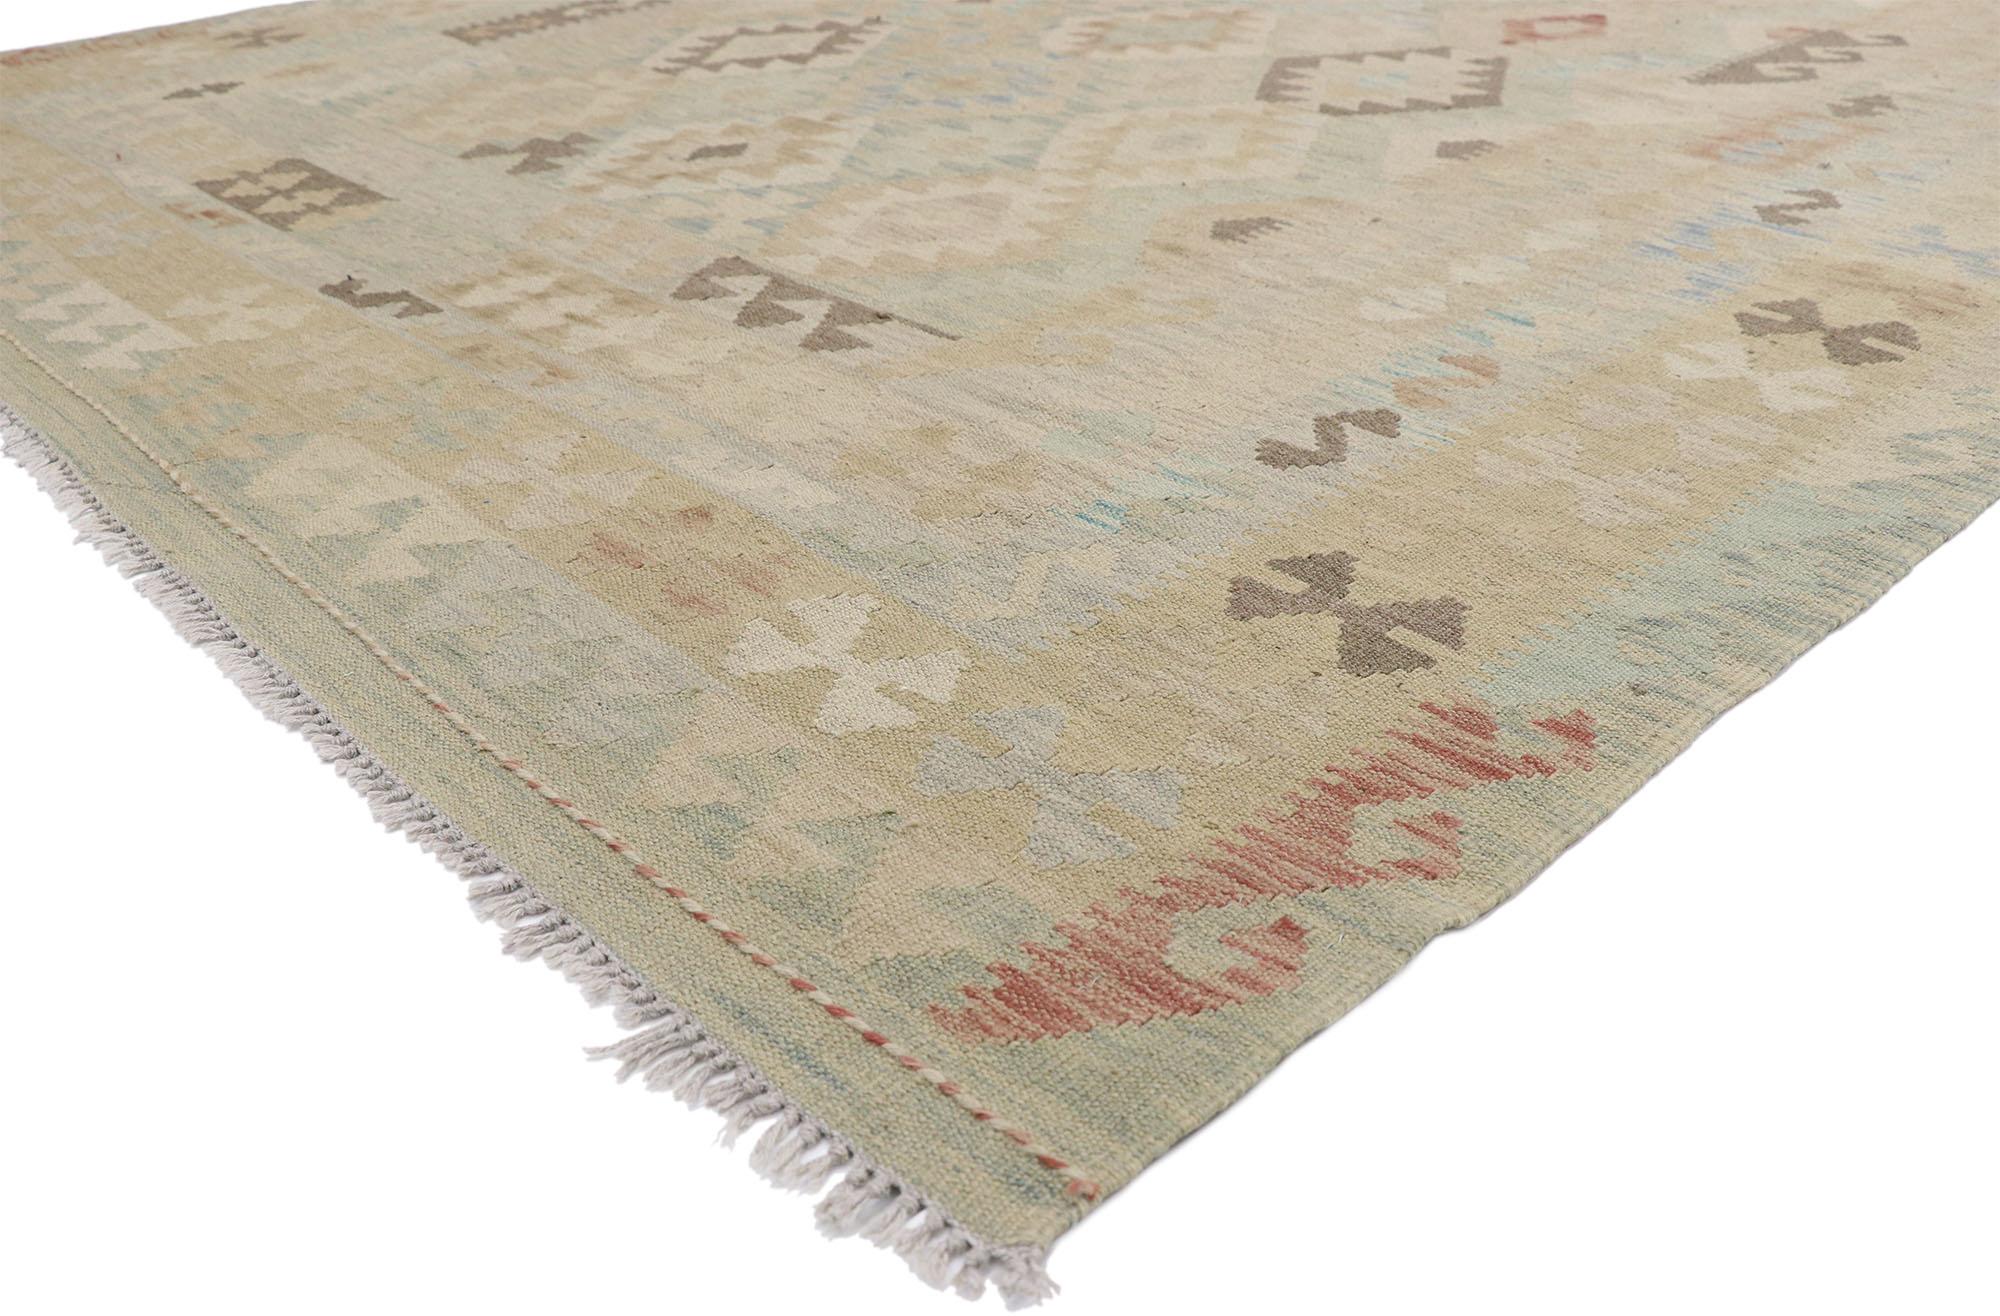 80118 Vintage Afghani Kilim Rug, 06'08 x 09'09. In this handwoven wool vintage Afghan kilim rug, Contemporary Santa Fe Design intertwines with Organic Modern style, forming a harmonious fusion that pays homage to the rich cultural heritage of Santa